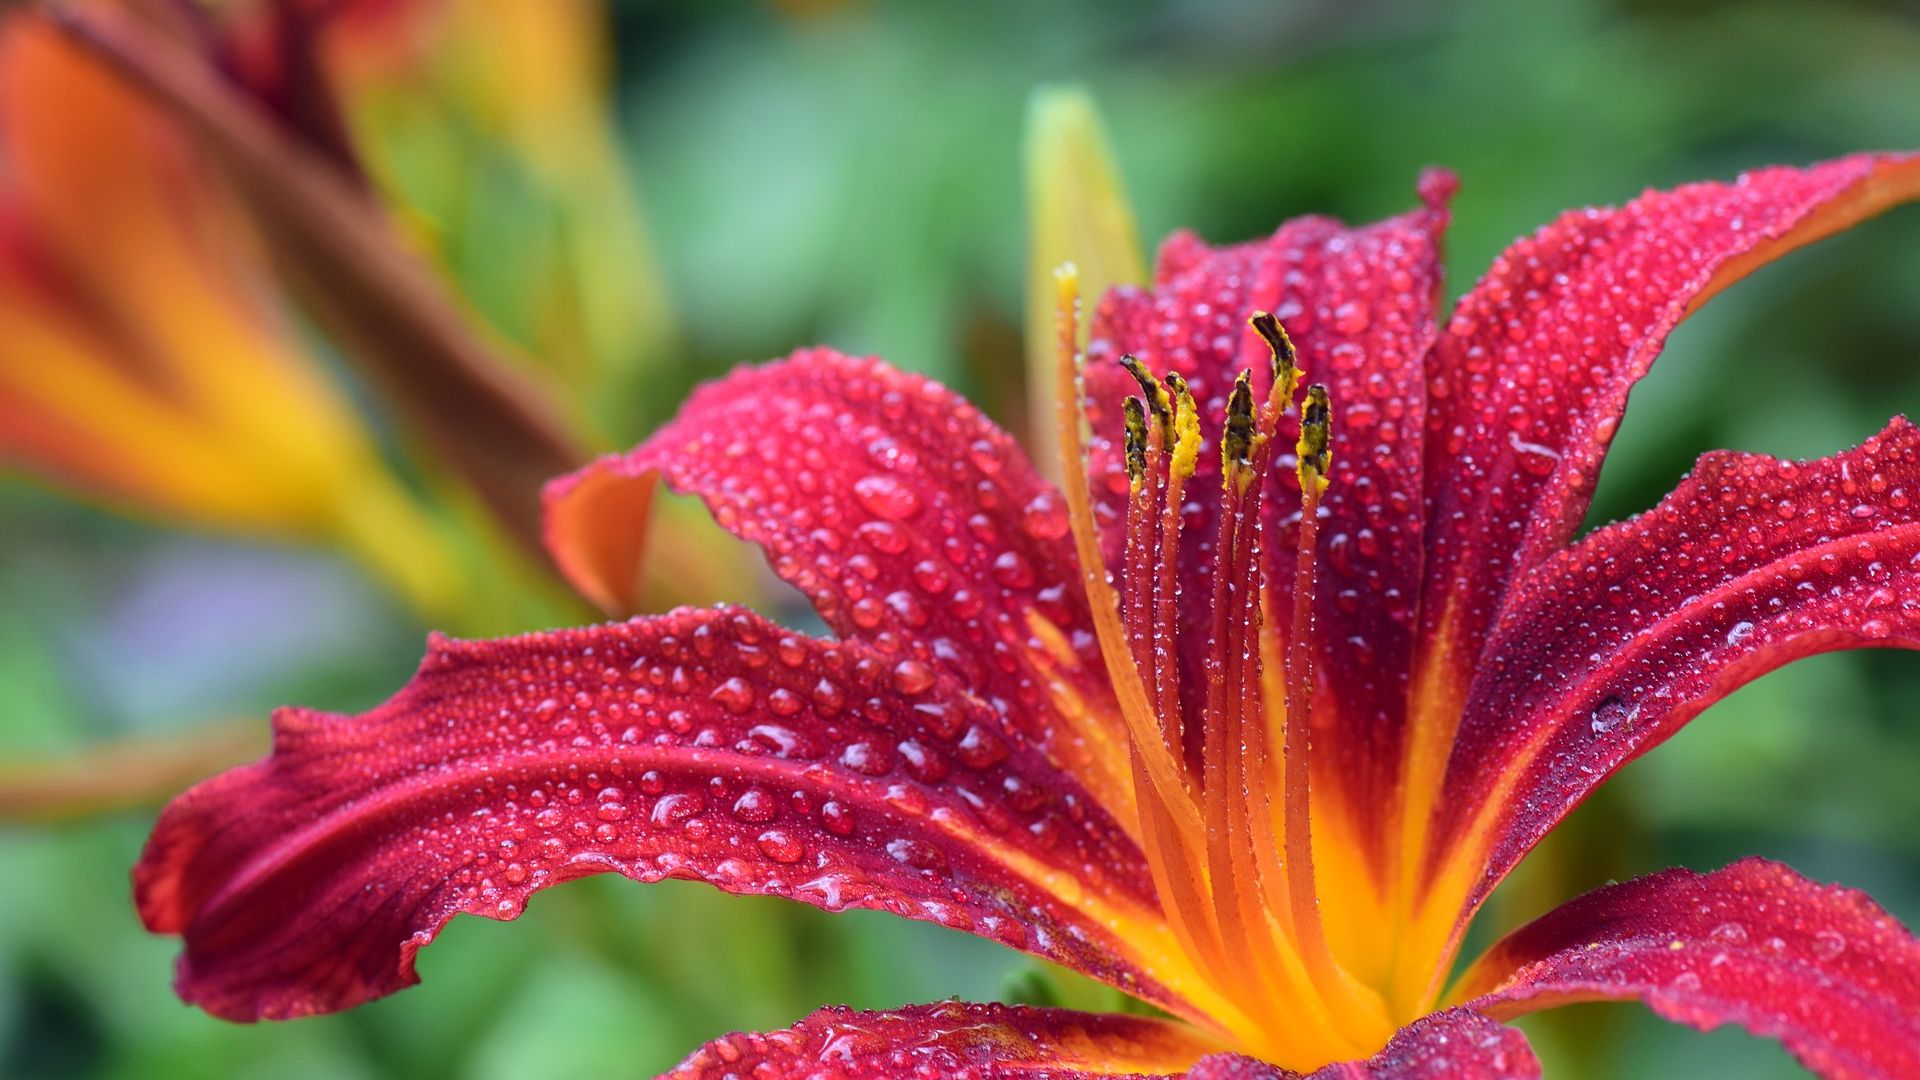 Lily Red Blossom And Dew Drops - Beautiful Flowers - HD Wallpaper 